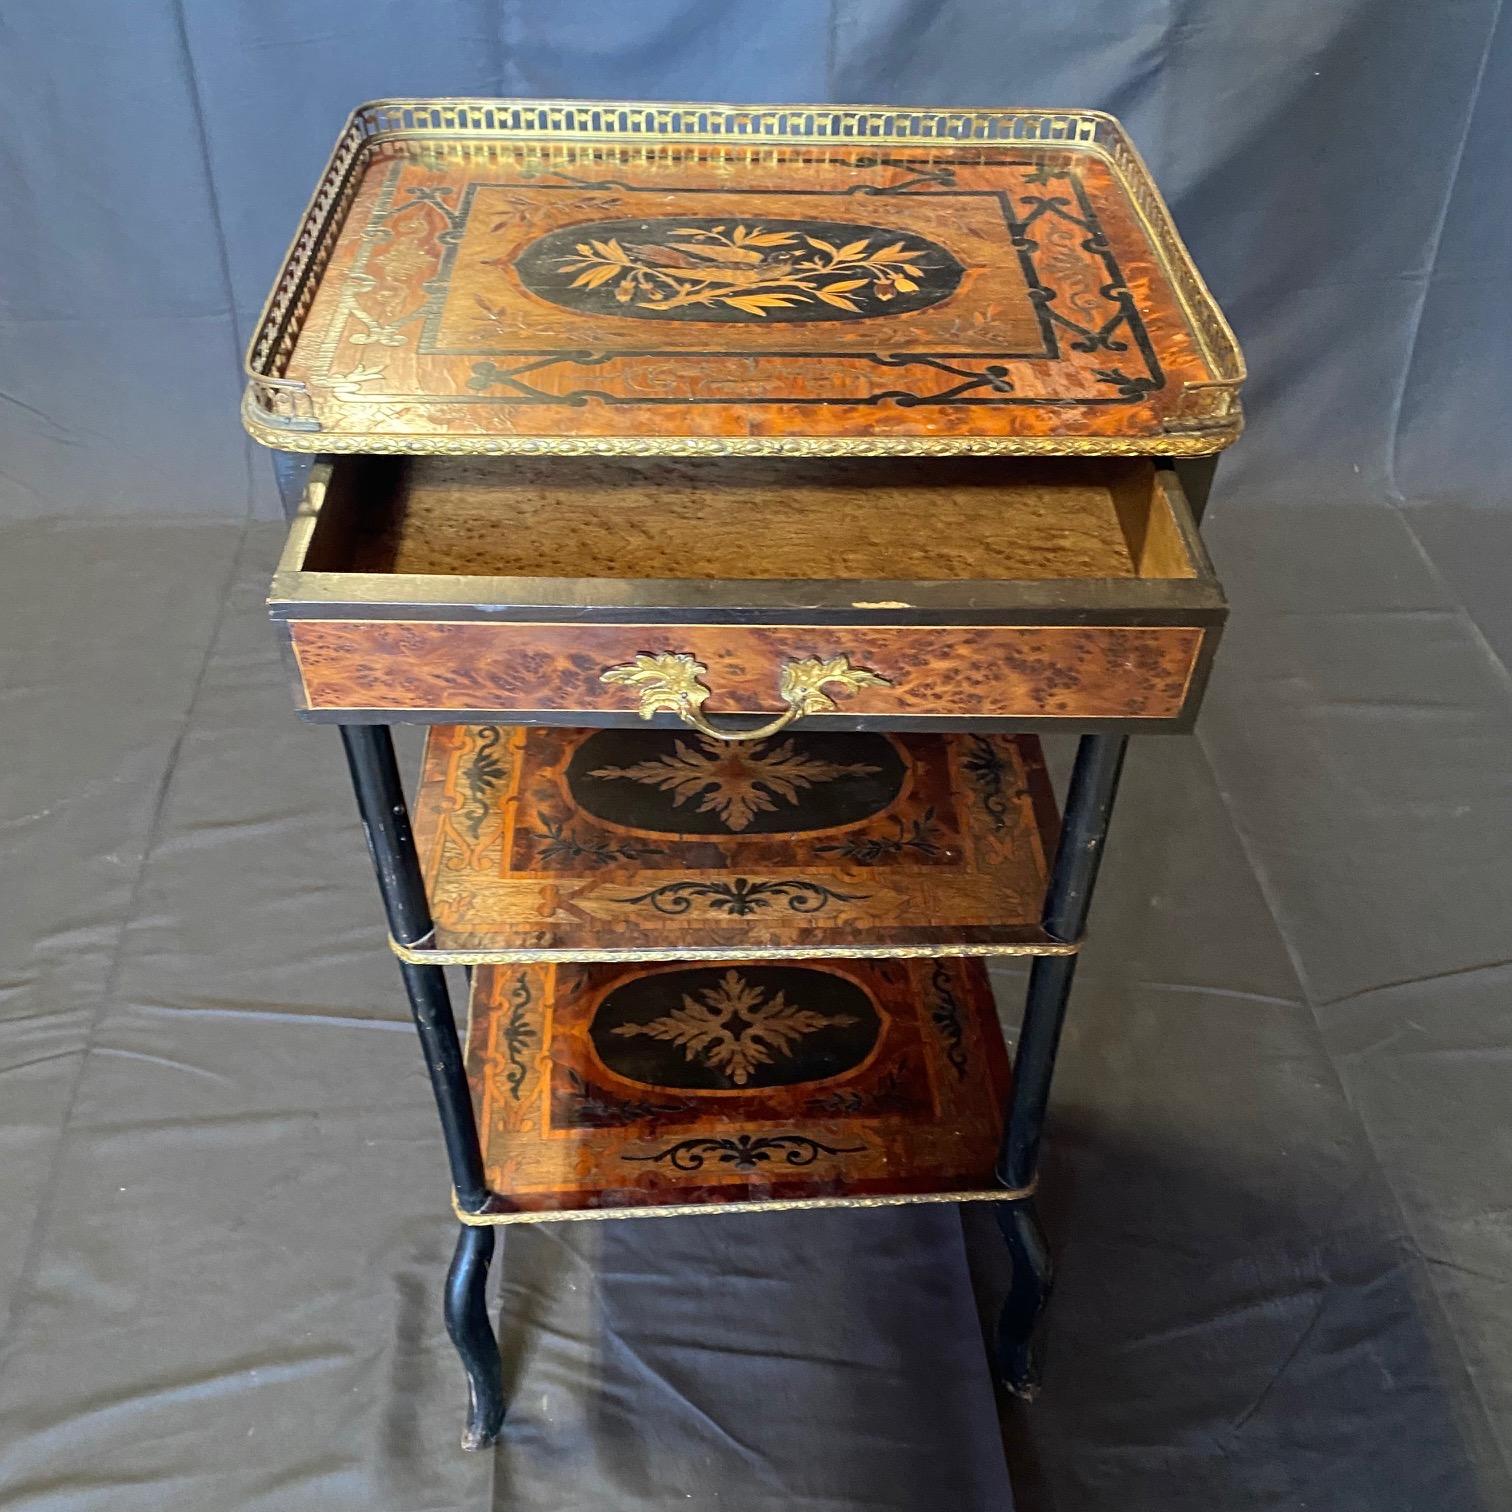 French three-tiered marquetry inlaid etagere table with brass gallery and one drawer. The top shelf depicts a beautifully inlaid bird on a branch with twigs and acorns, and the one dovetailed drawer is directly below with burlwood face and lovely